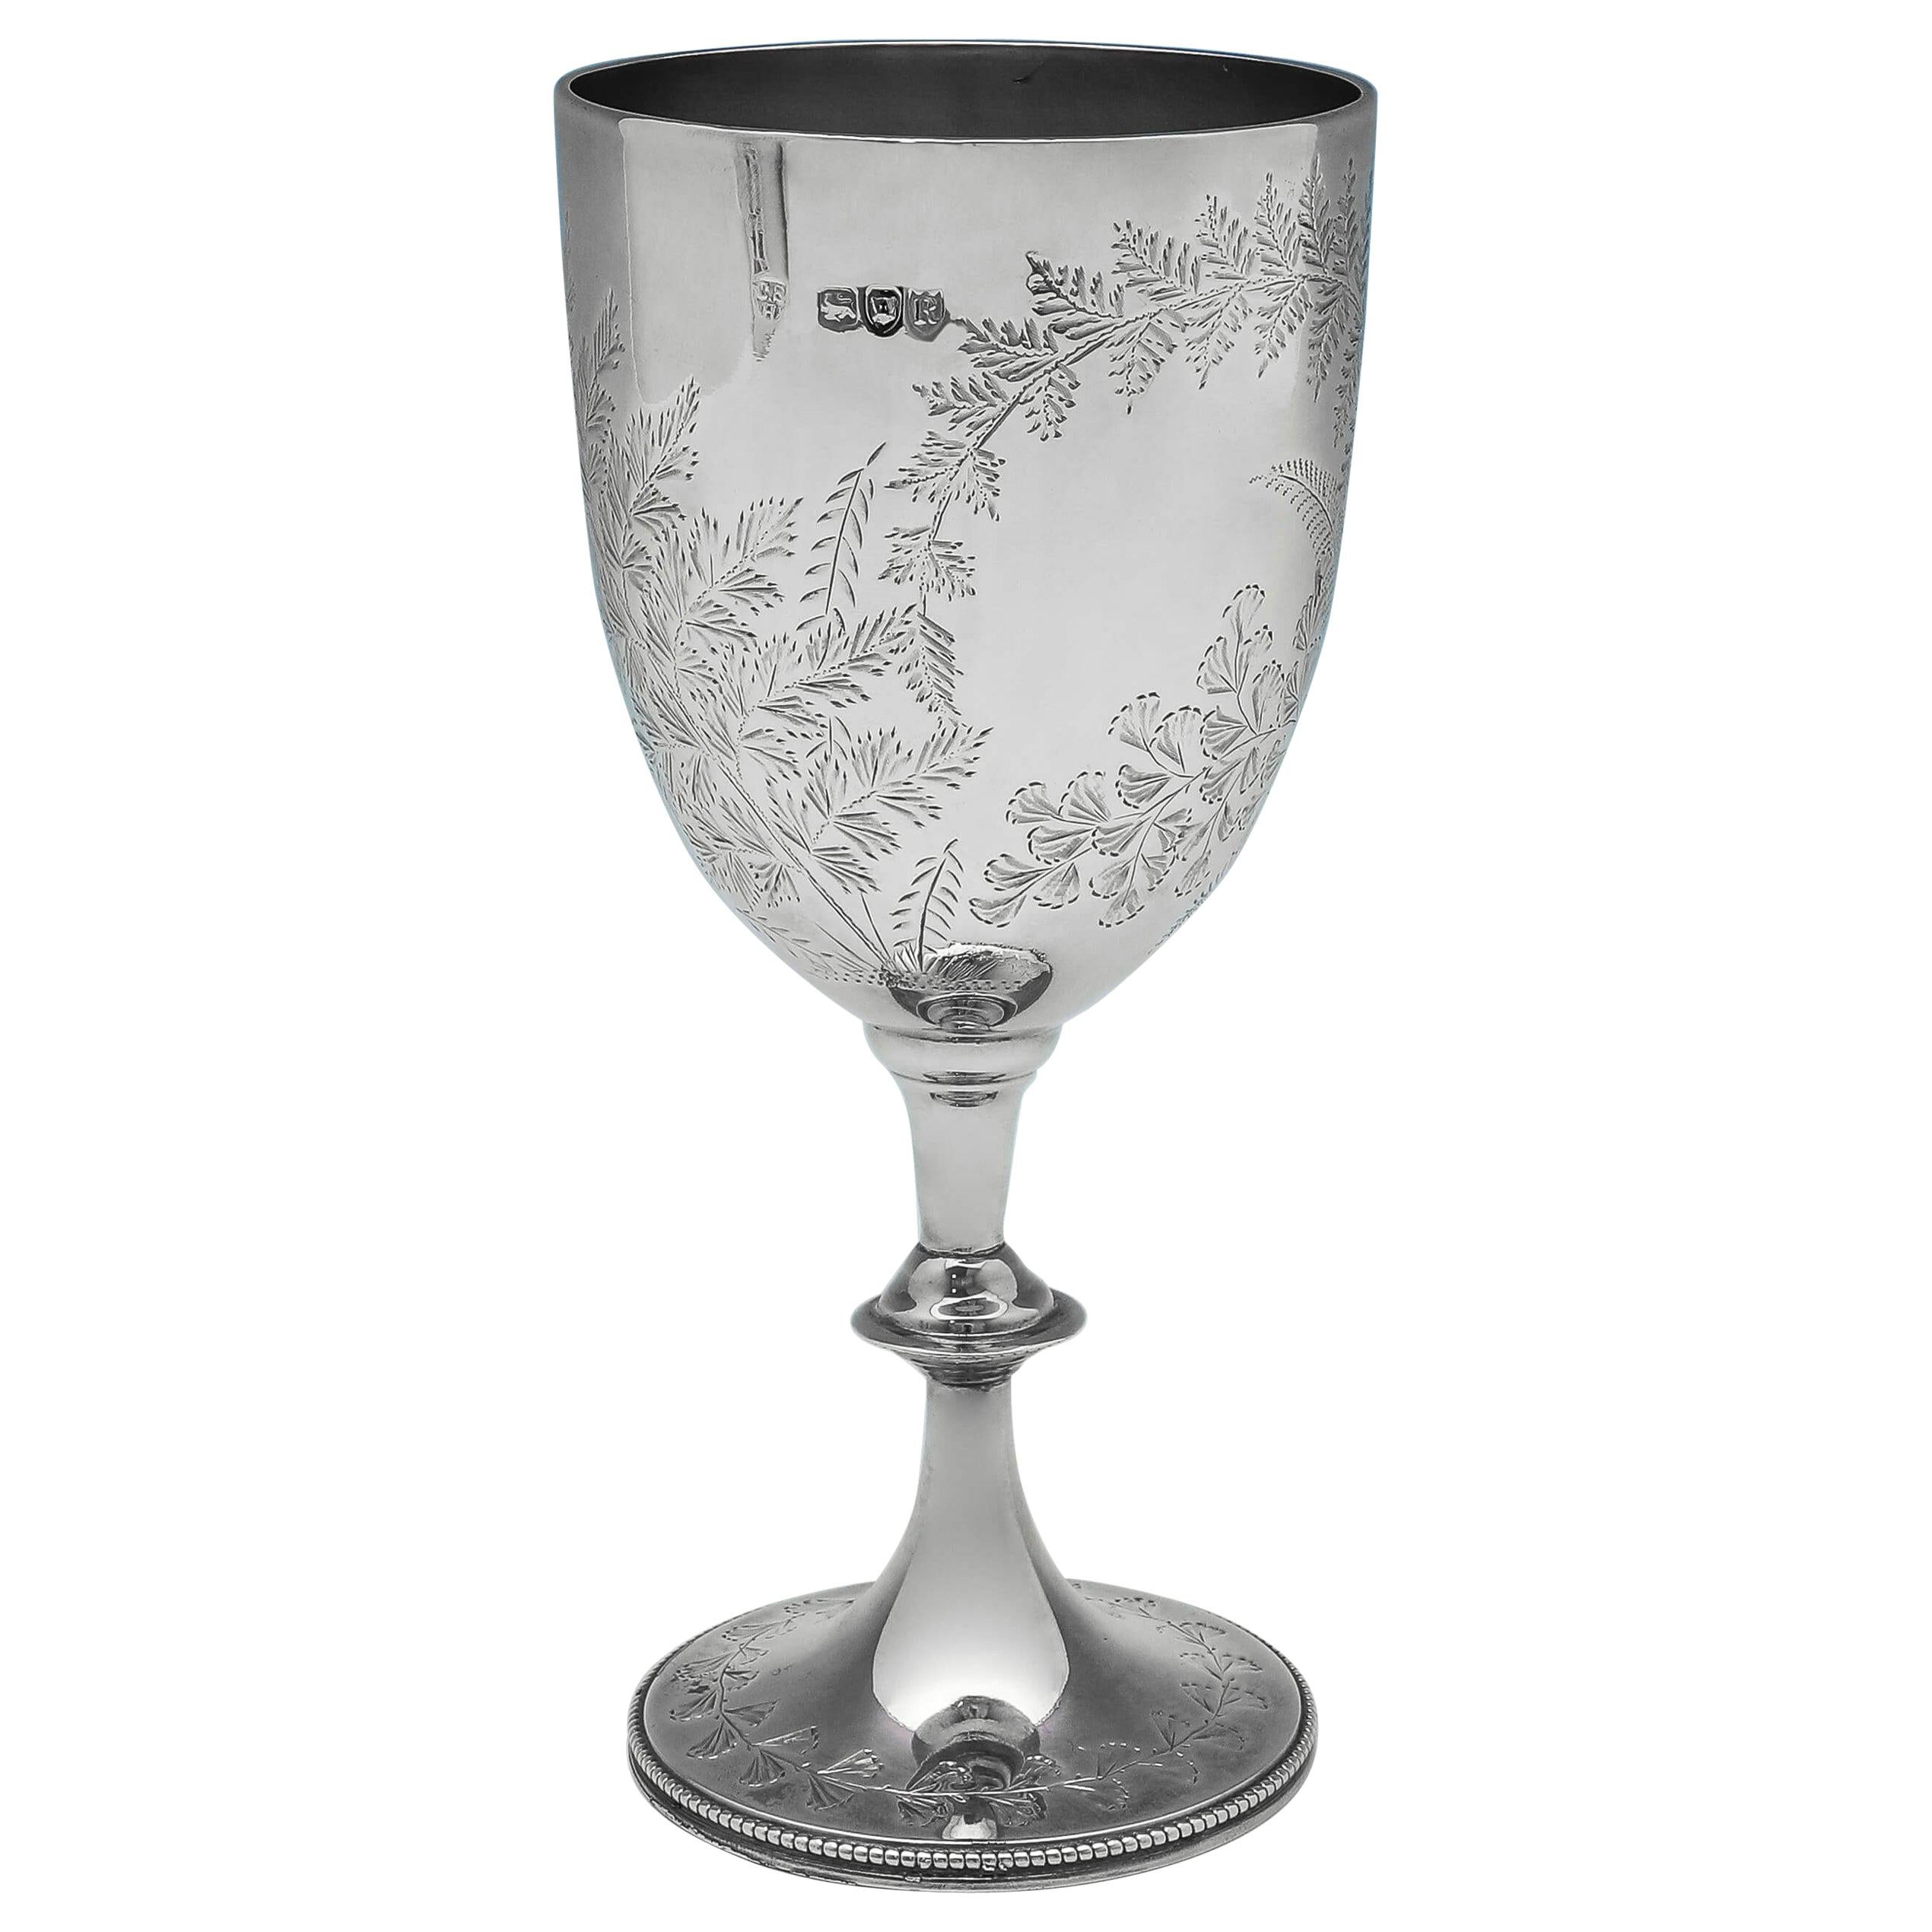 Victorian Antique Sterling Silver Engraved Goblet by C. S. Harris London, 1892